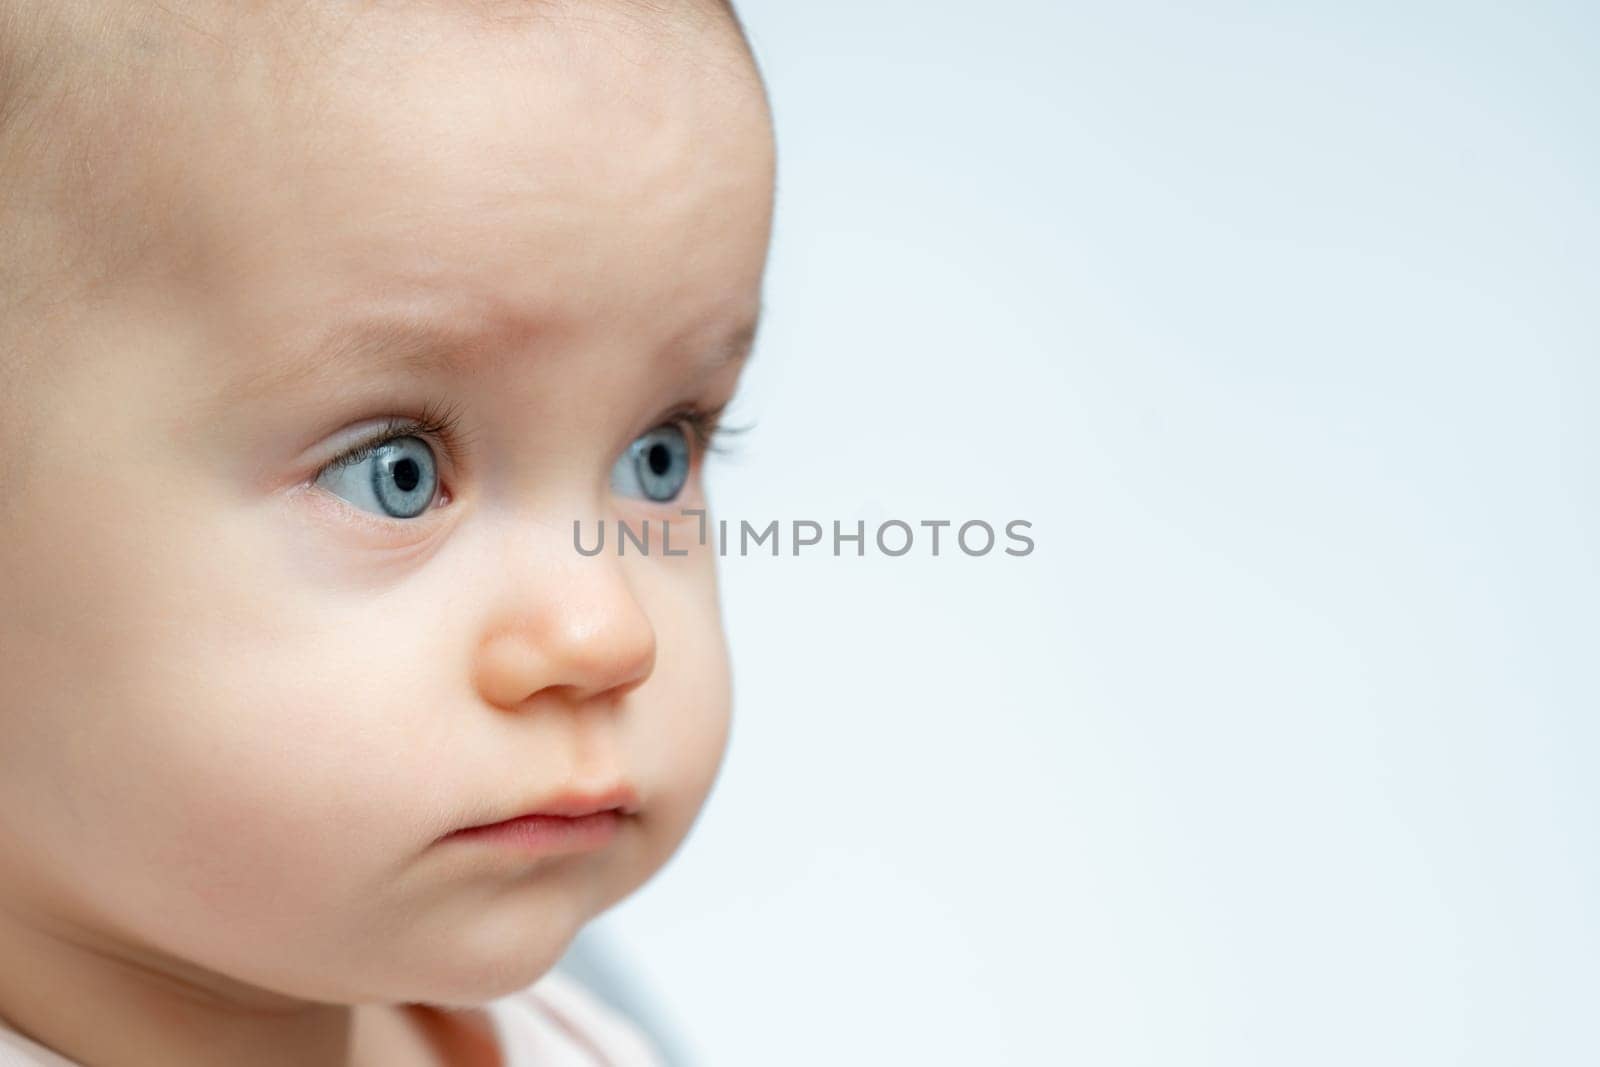 In this close-up, a one year old baby looks away from the camera, their face a canvas of curiosity and innocence. The photograph captures the essence of childhood wonder, showcasing the purity of exploring the world around them.